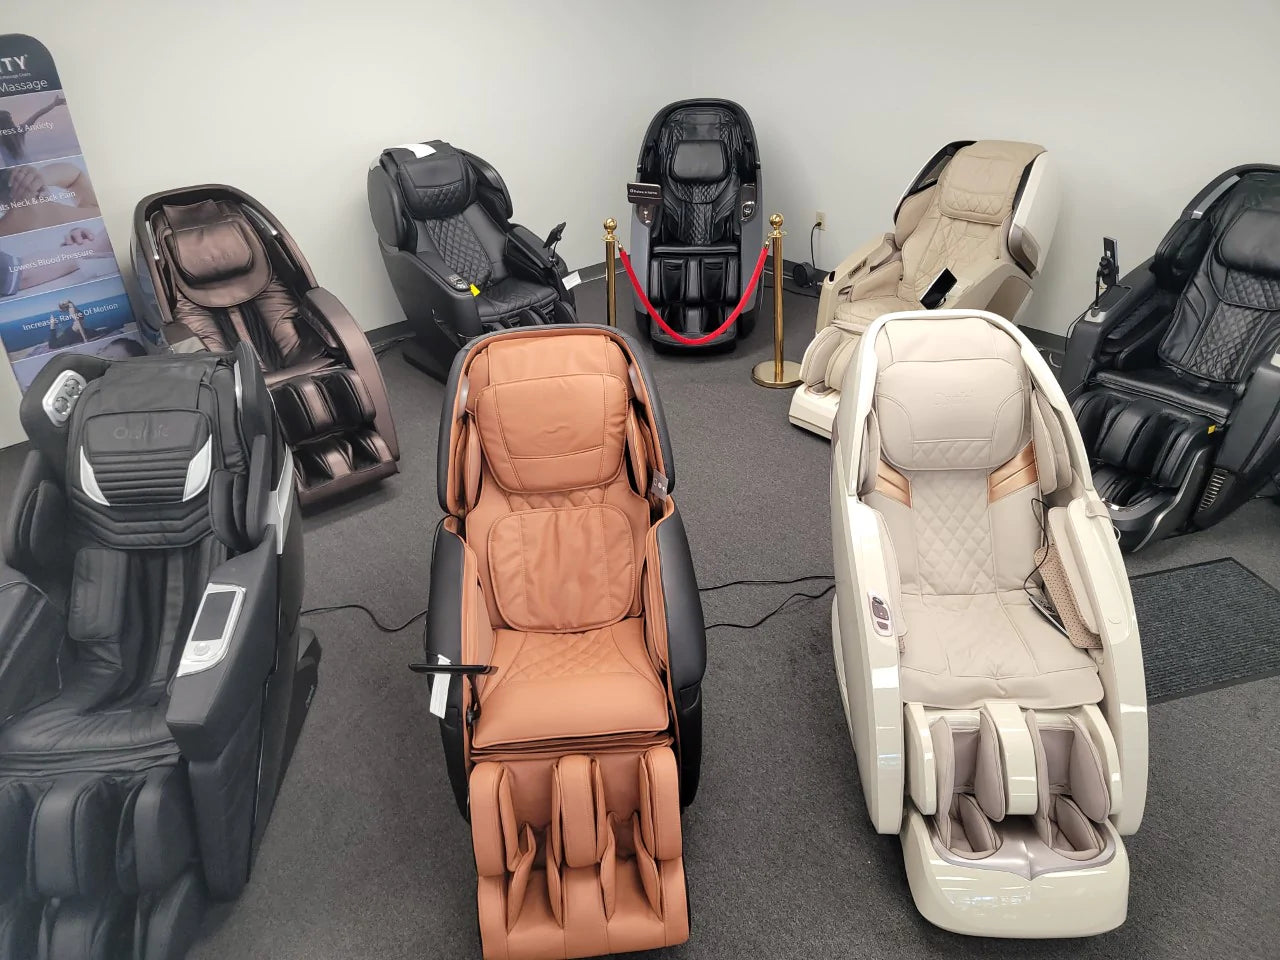 The Modern Back in Sarasota, FL offers a wide selection of massage chairs from brands like Ogawa, Daiwa, Osaki, and more. 